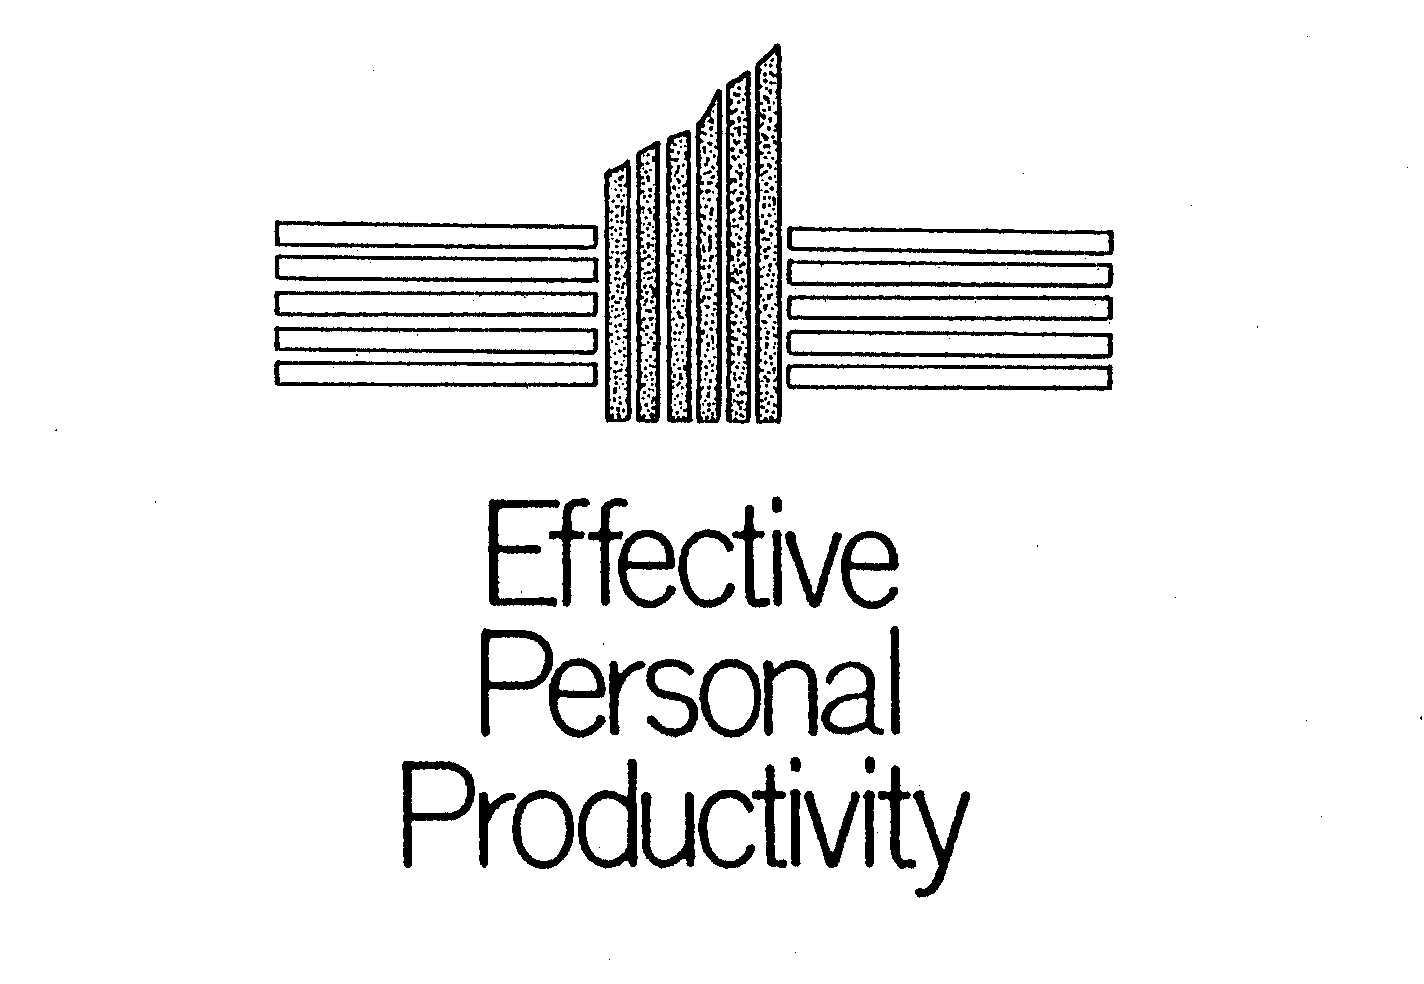 EFFECTIVE PERSONAL PRODUCTIVITY